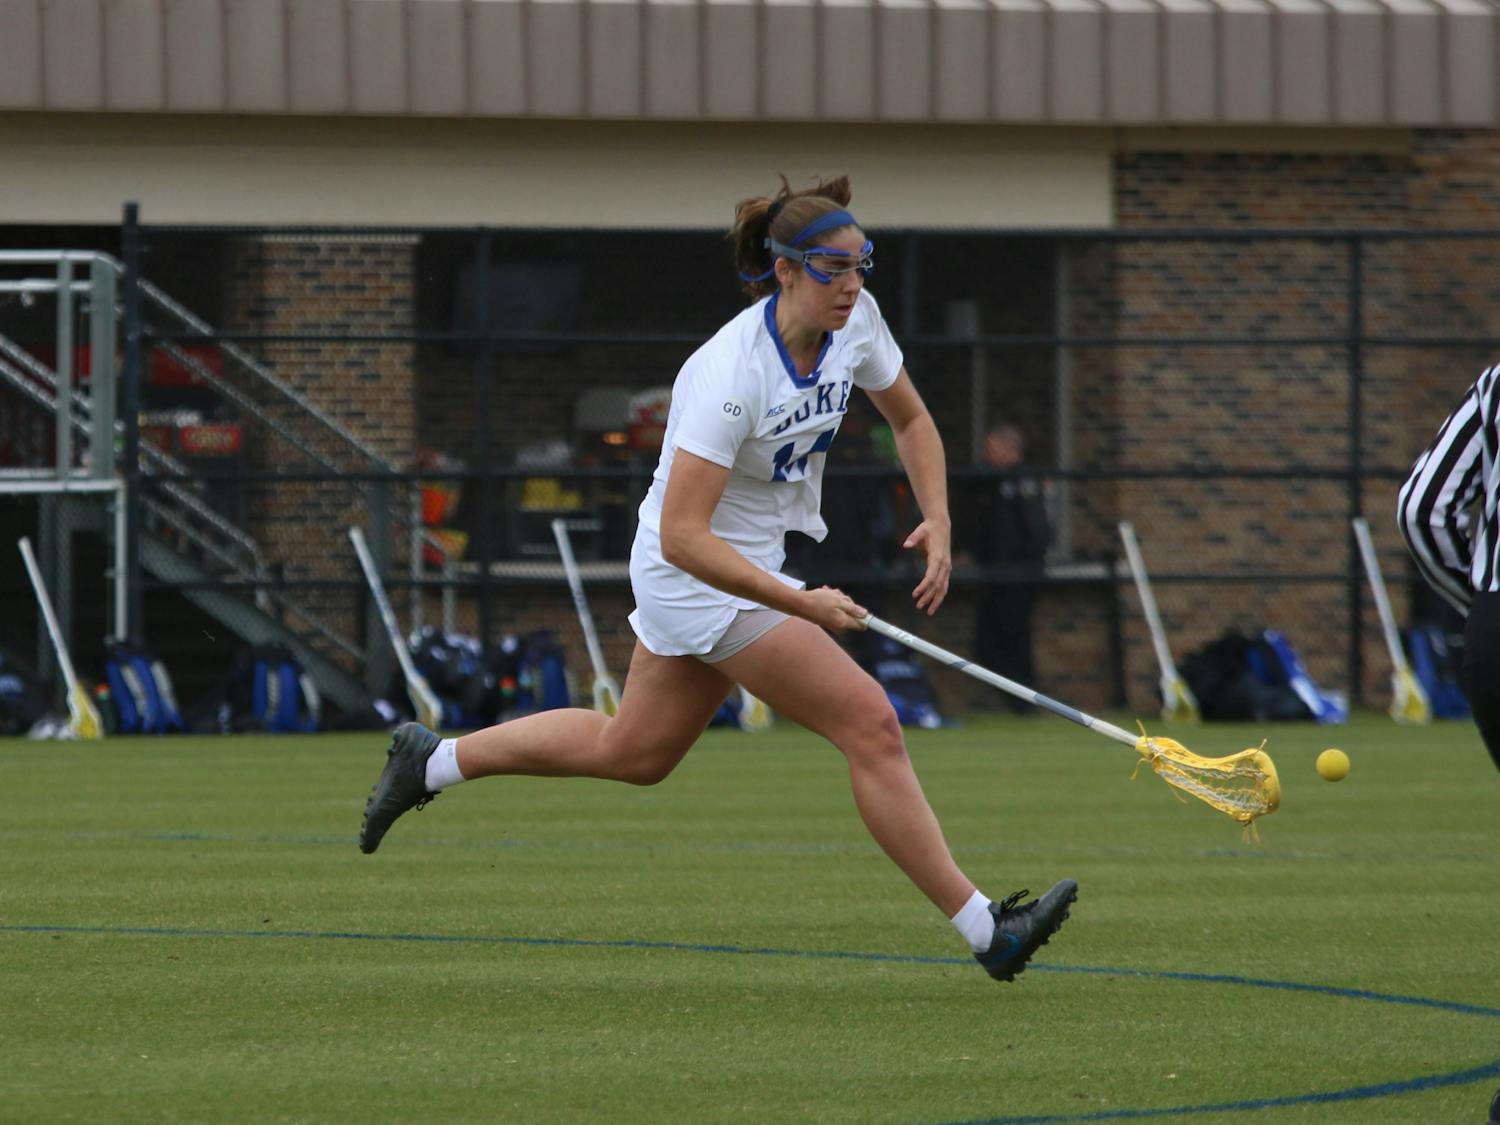 Maddie Jenner broke the NCAA career draw control record in a February rout of Gardner-Webb.